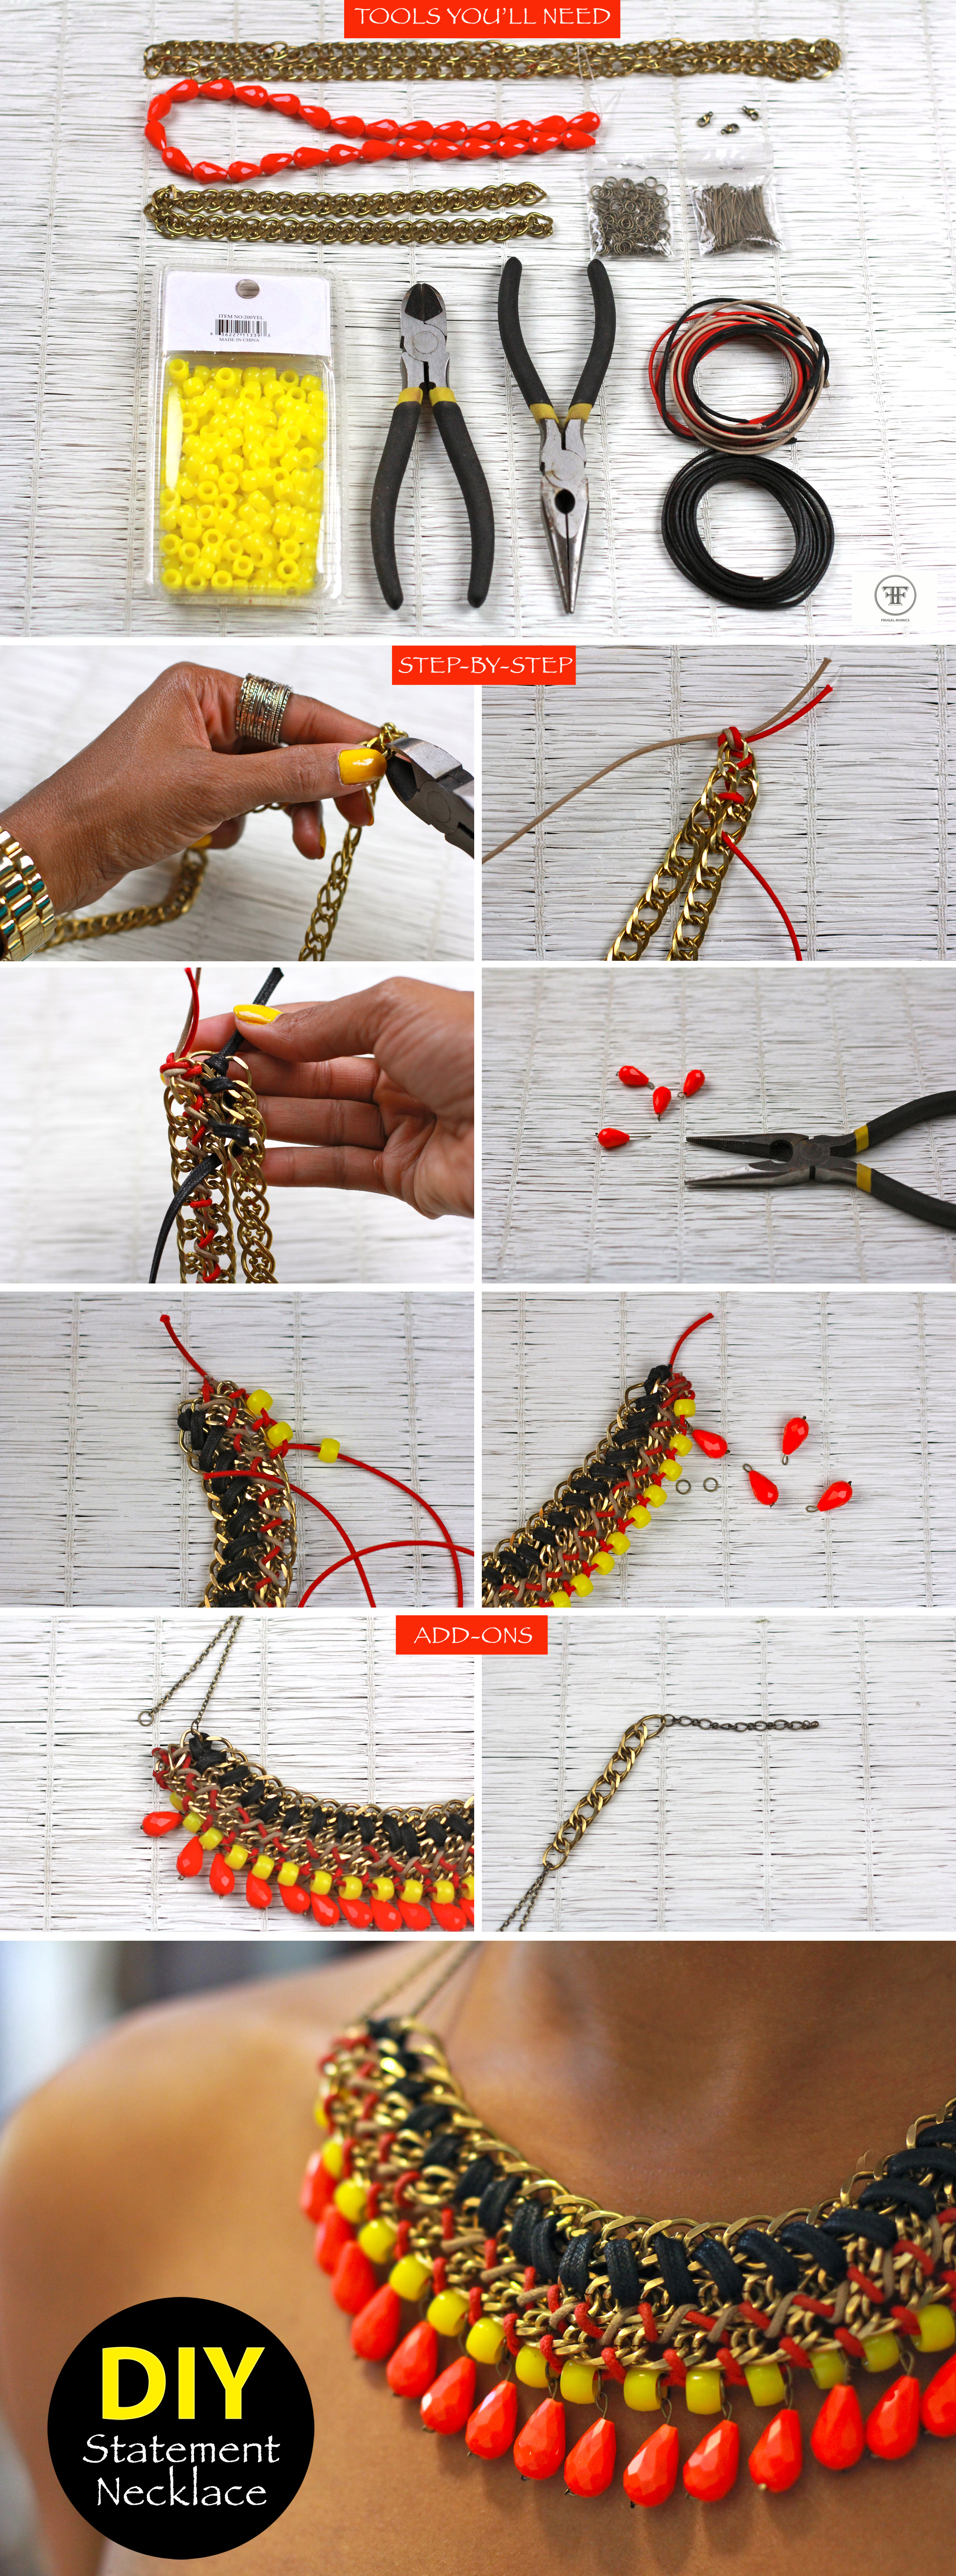 DIY Statement Necklace Ideas That You Would Love To Try